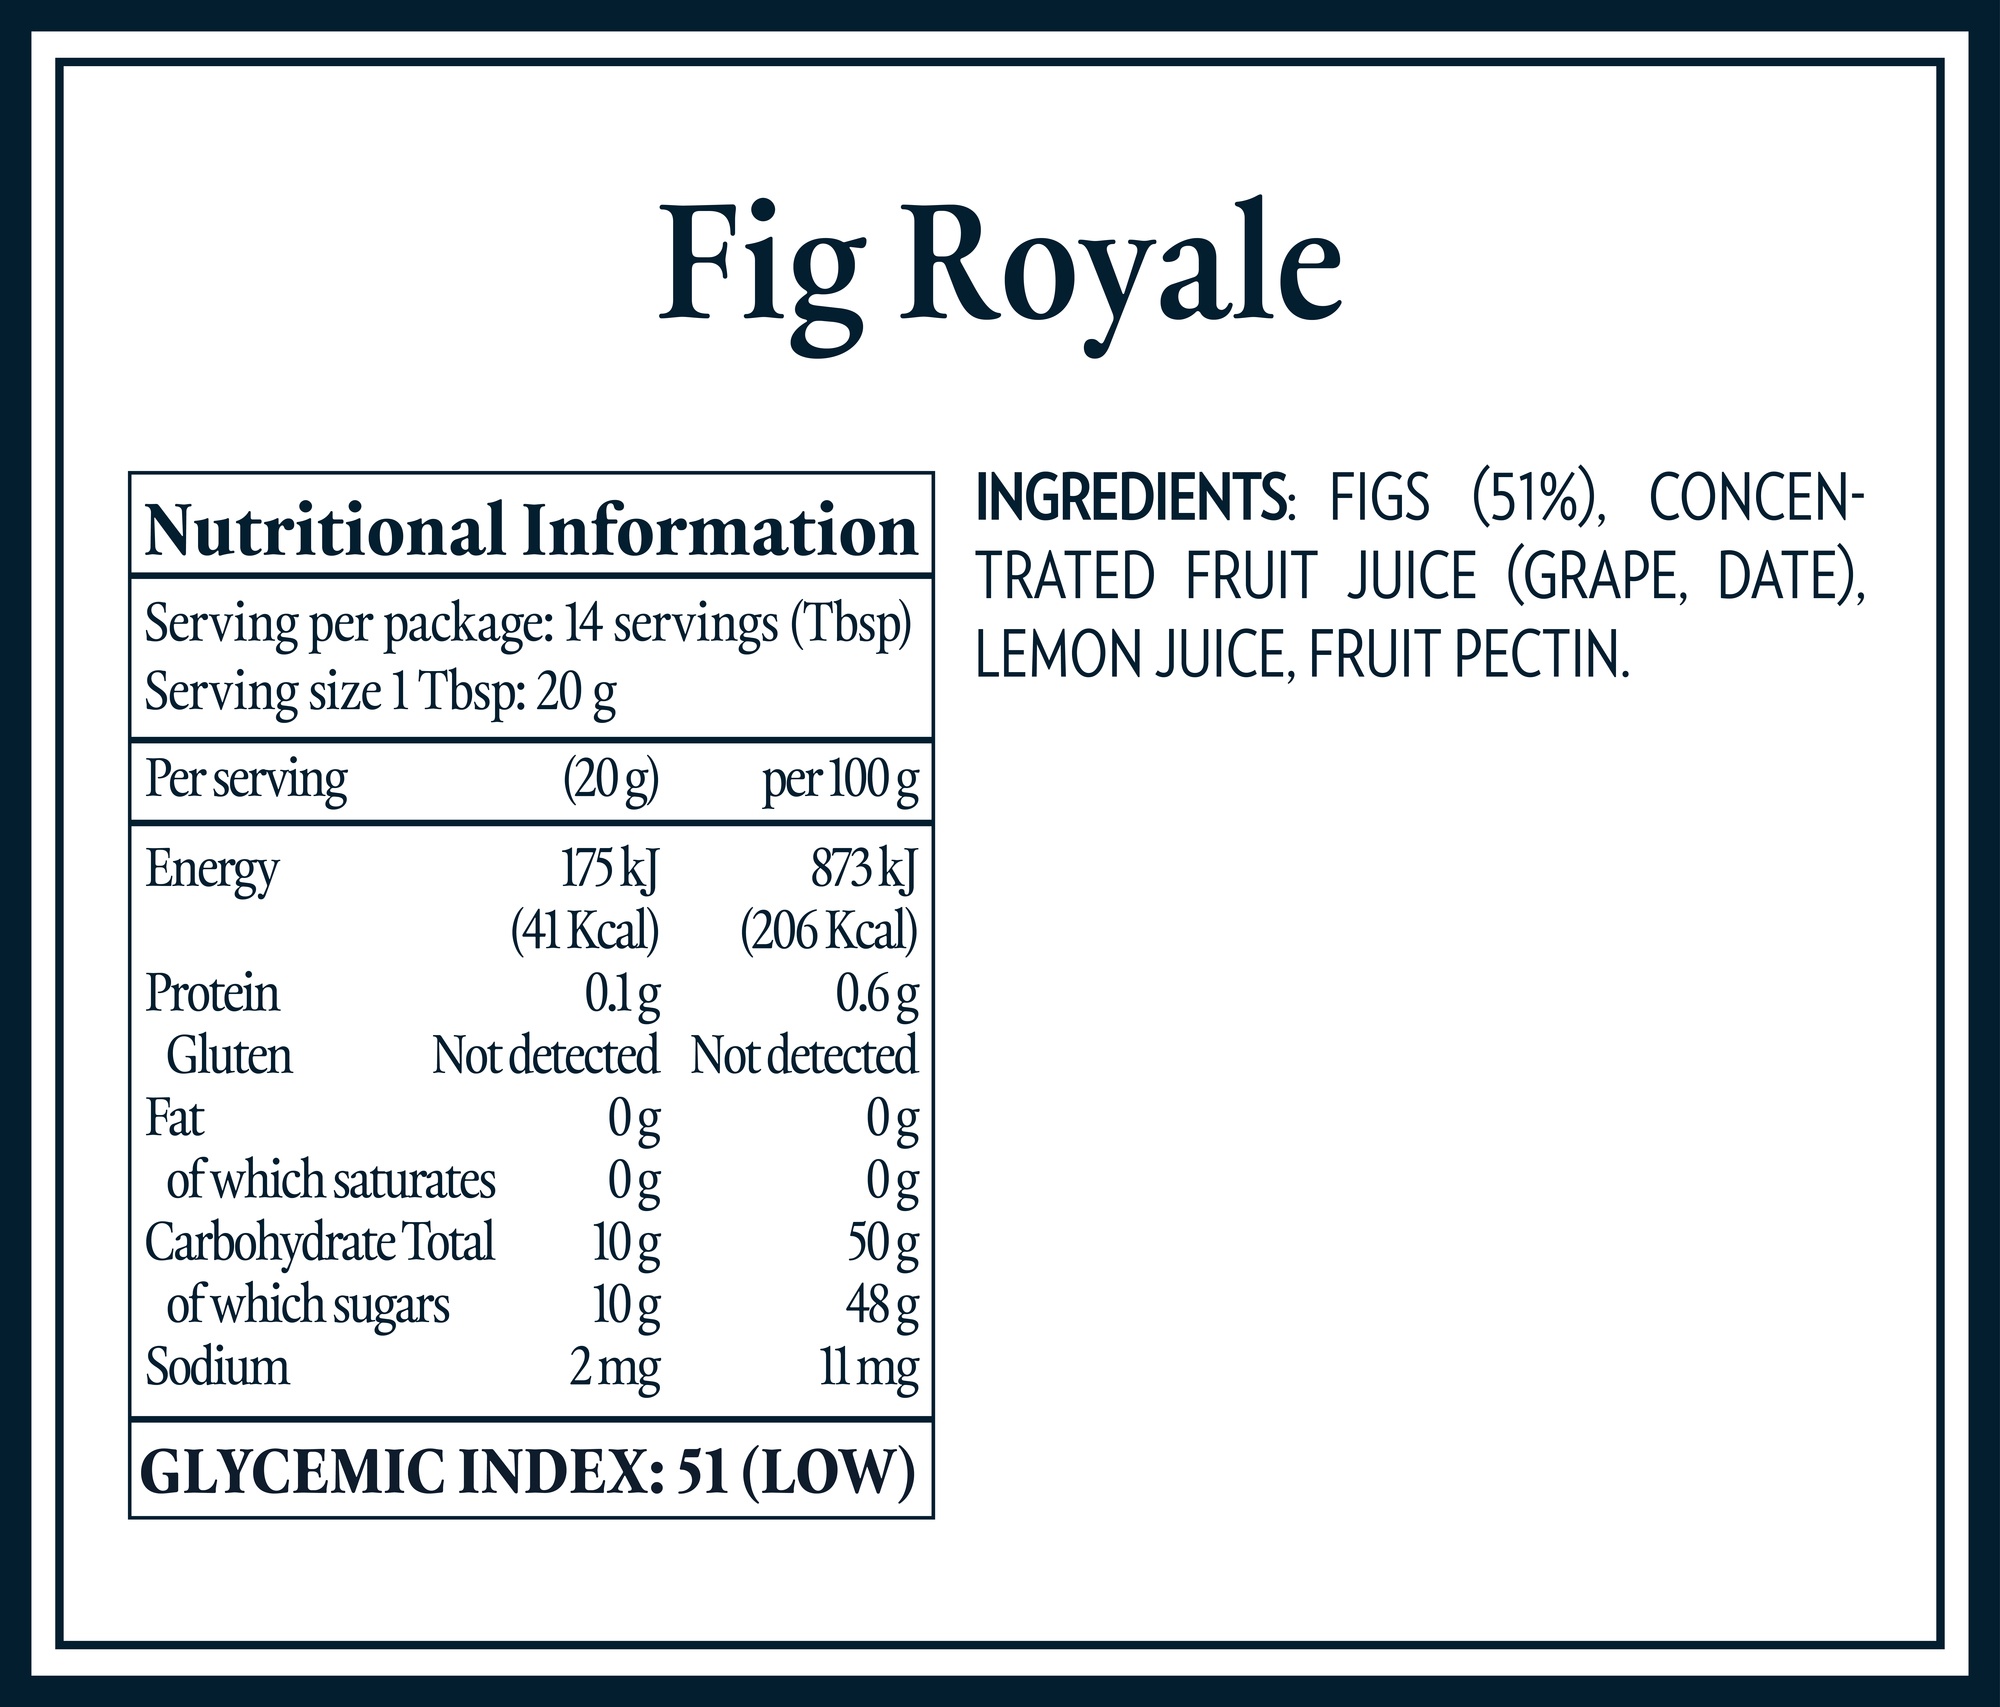 Nutrition Tables & Ingredients_AUS_fig royale